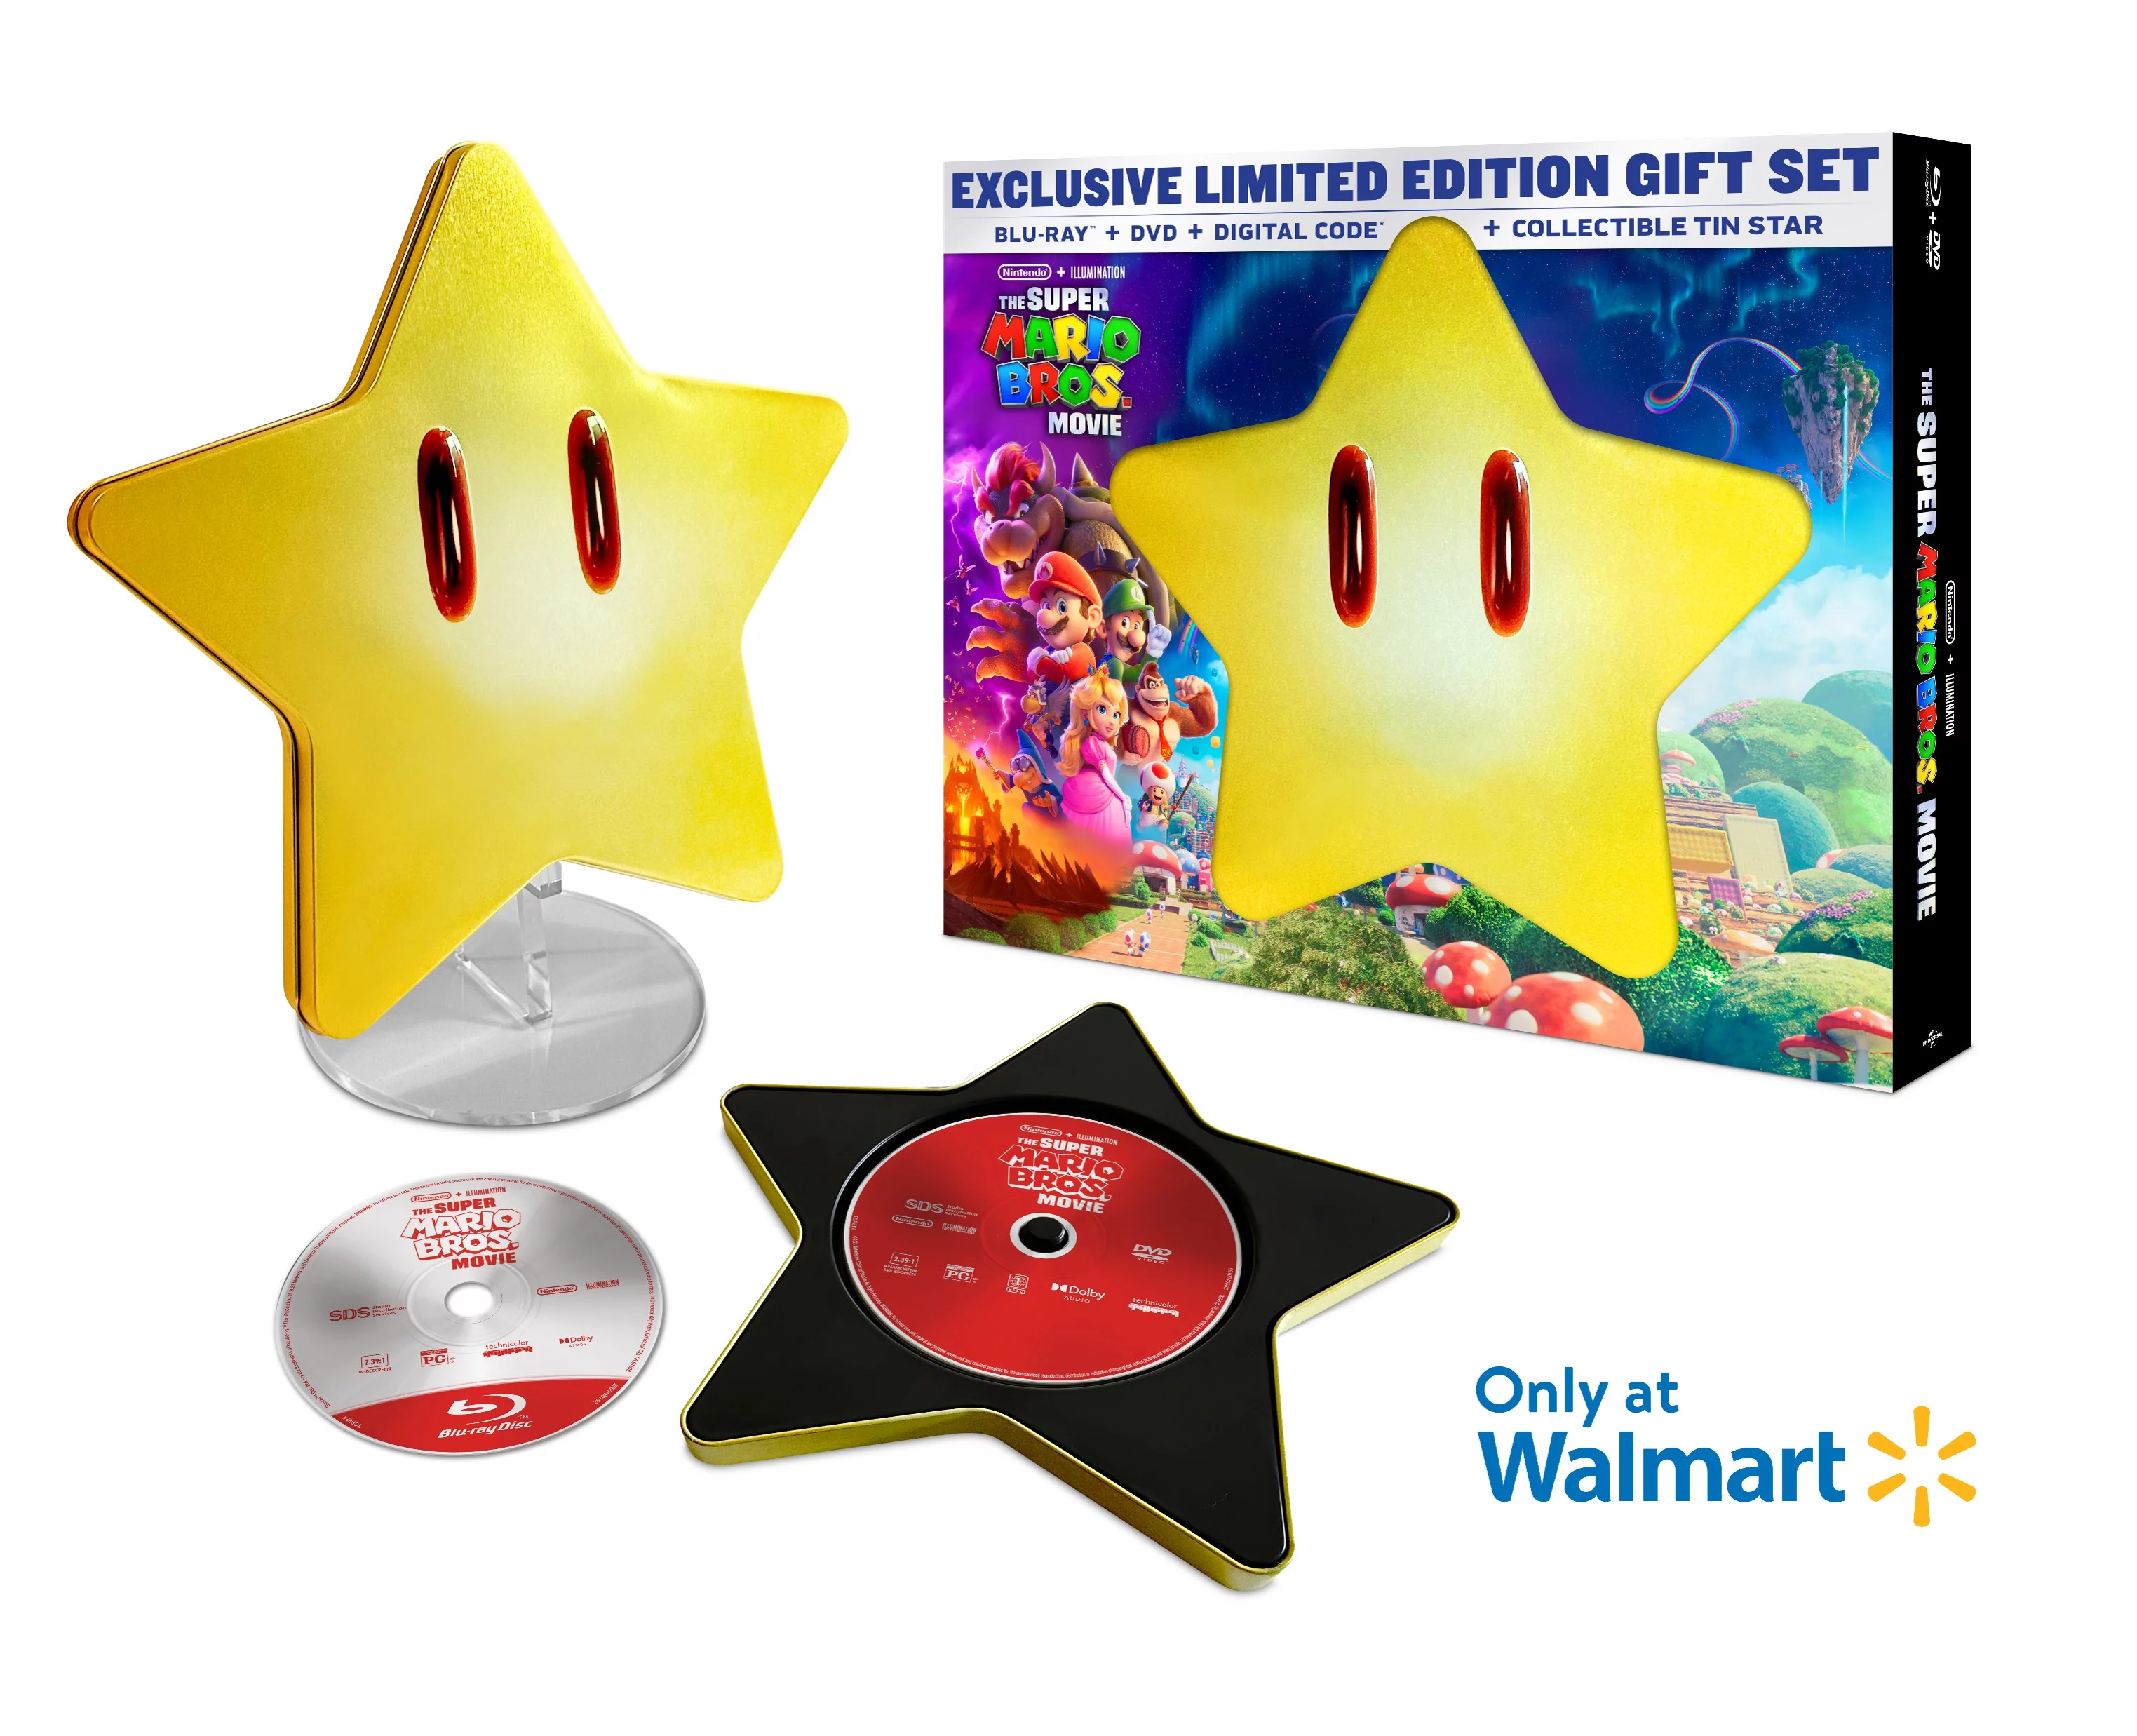 The Super Mario Bros. Movie Limited Edition Giftset with Collectible Tin Star (Walmart Exclusive) (Blu-ray + DVD + Digital Copy)